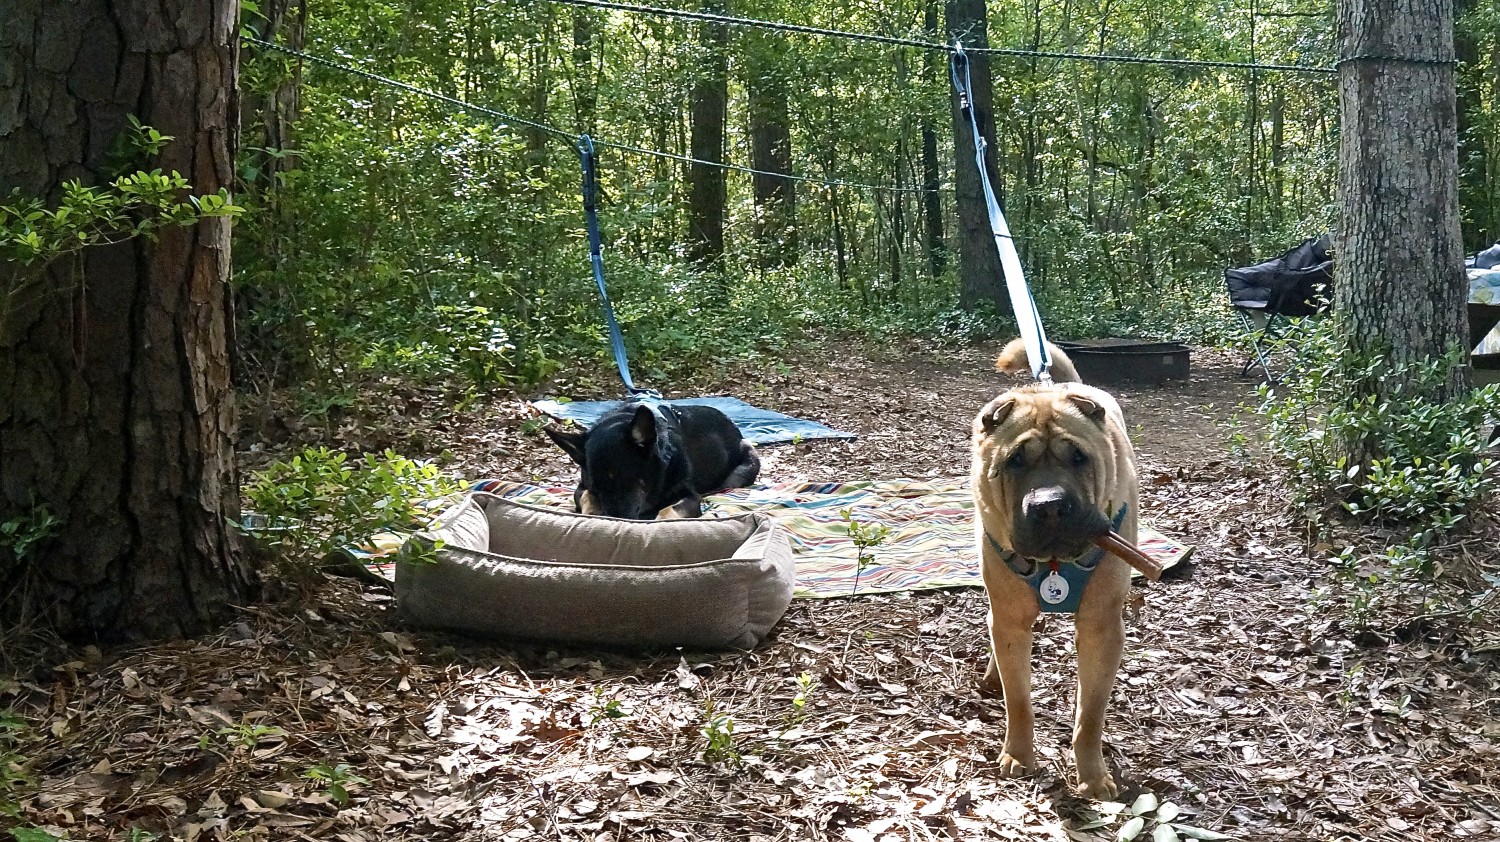  Ty the Shar-pei and Buster the German Shepherd from GoPetFriendly.com relaxing on their zip line in a campground